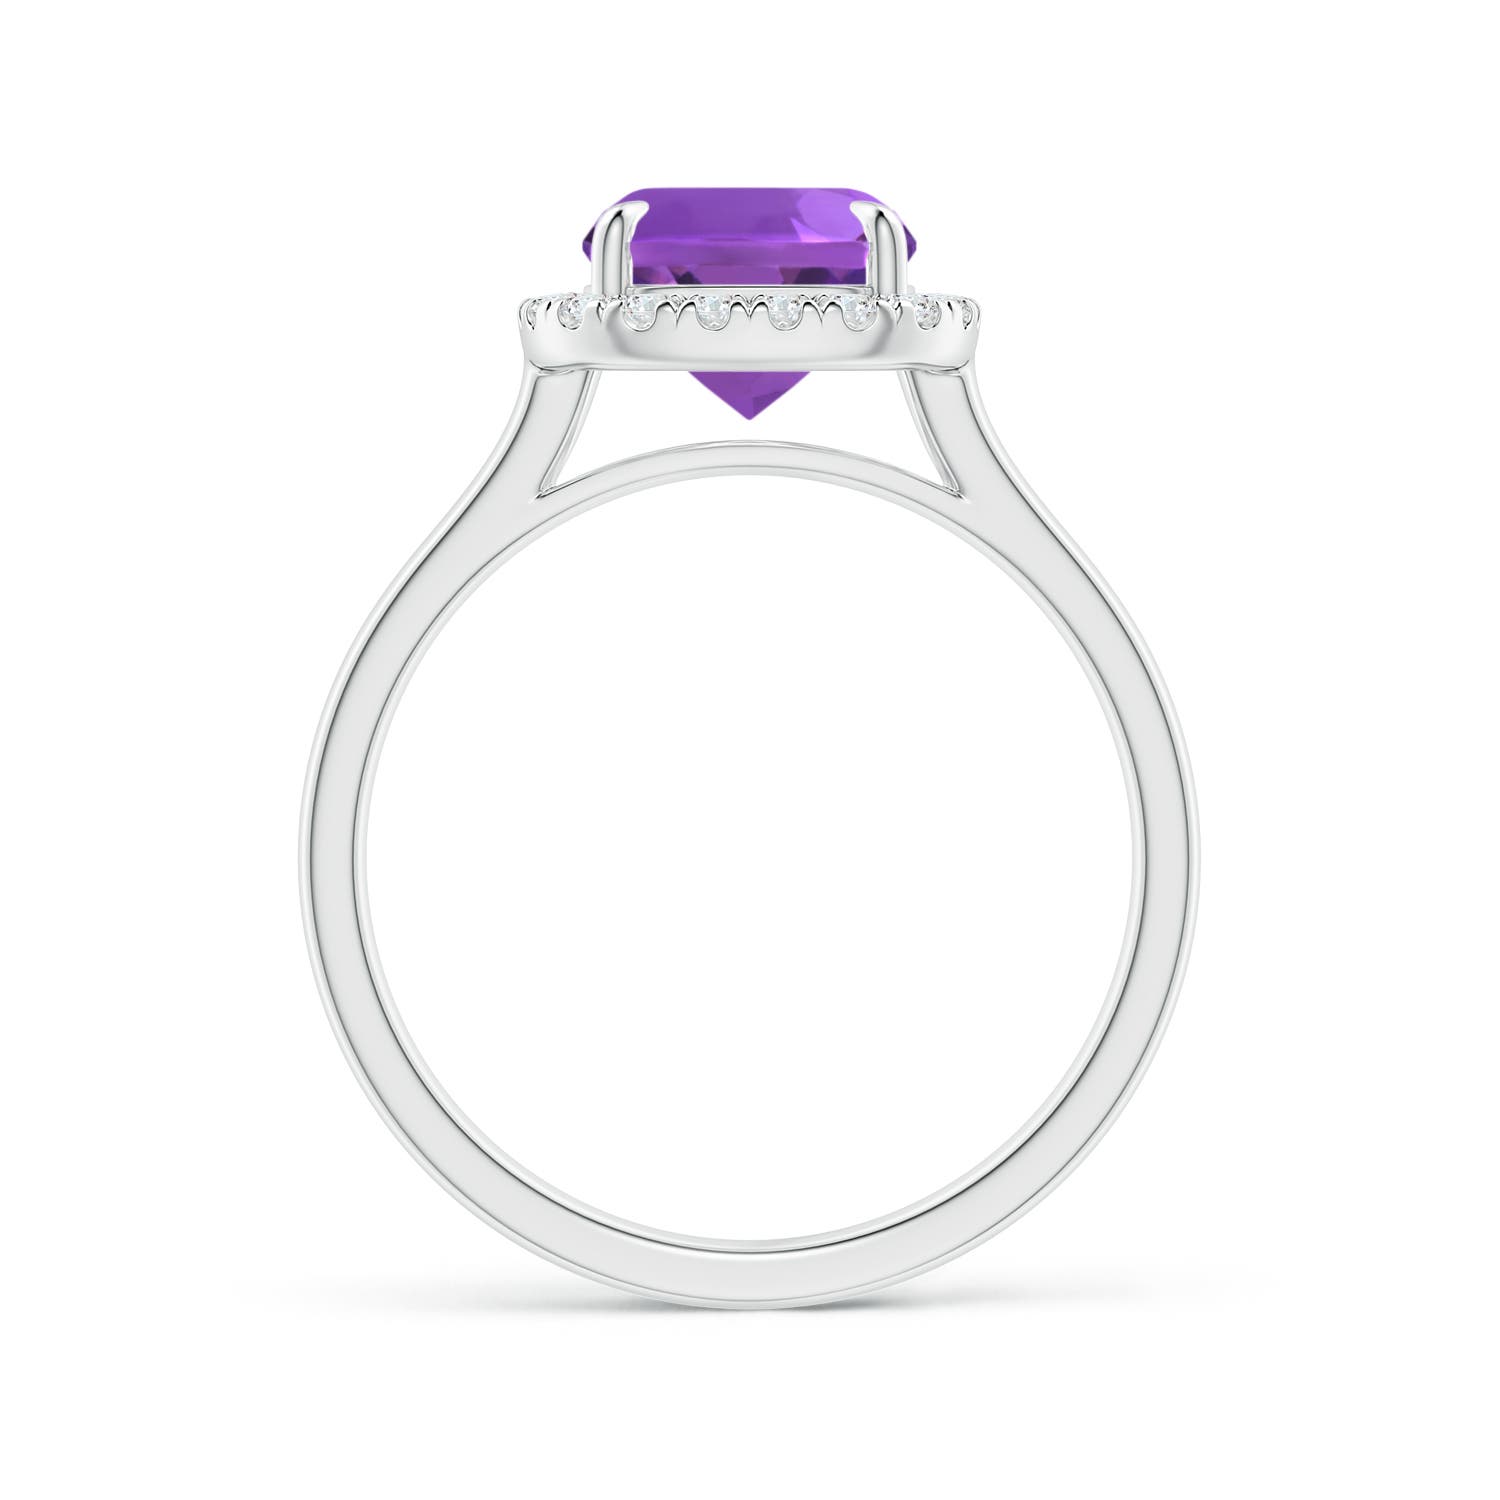 AAA - Amethyst / 2.22 CT / 14 KT White Gold